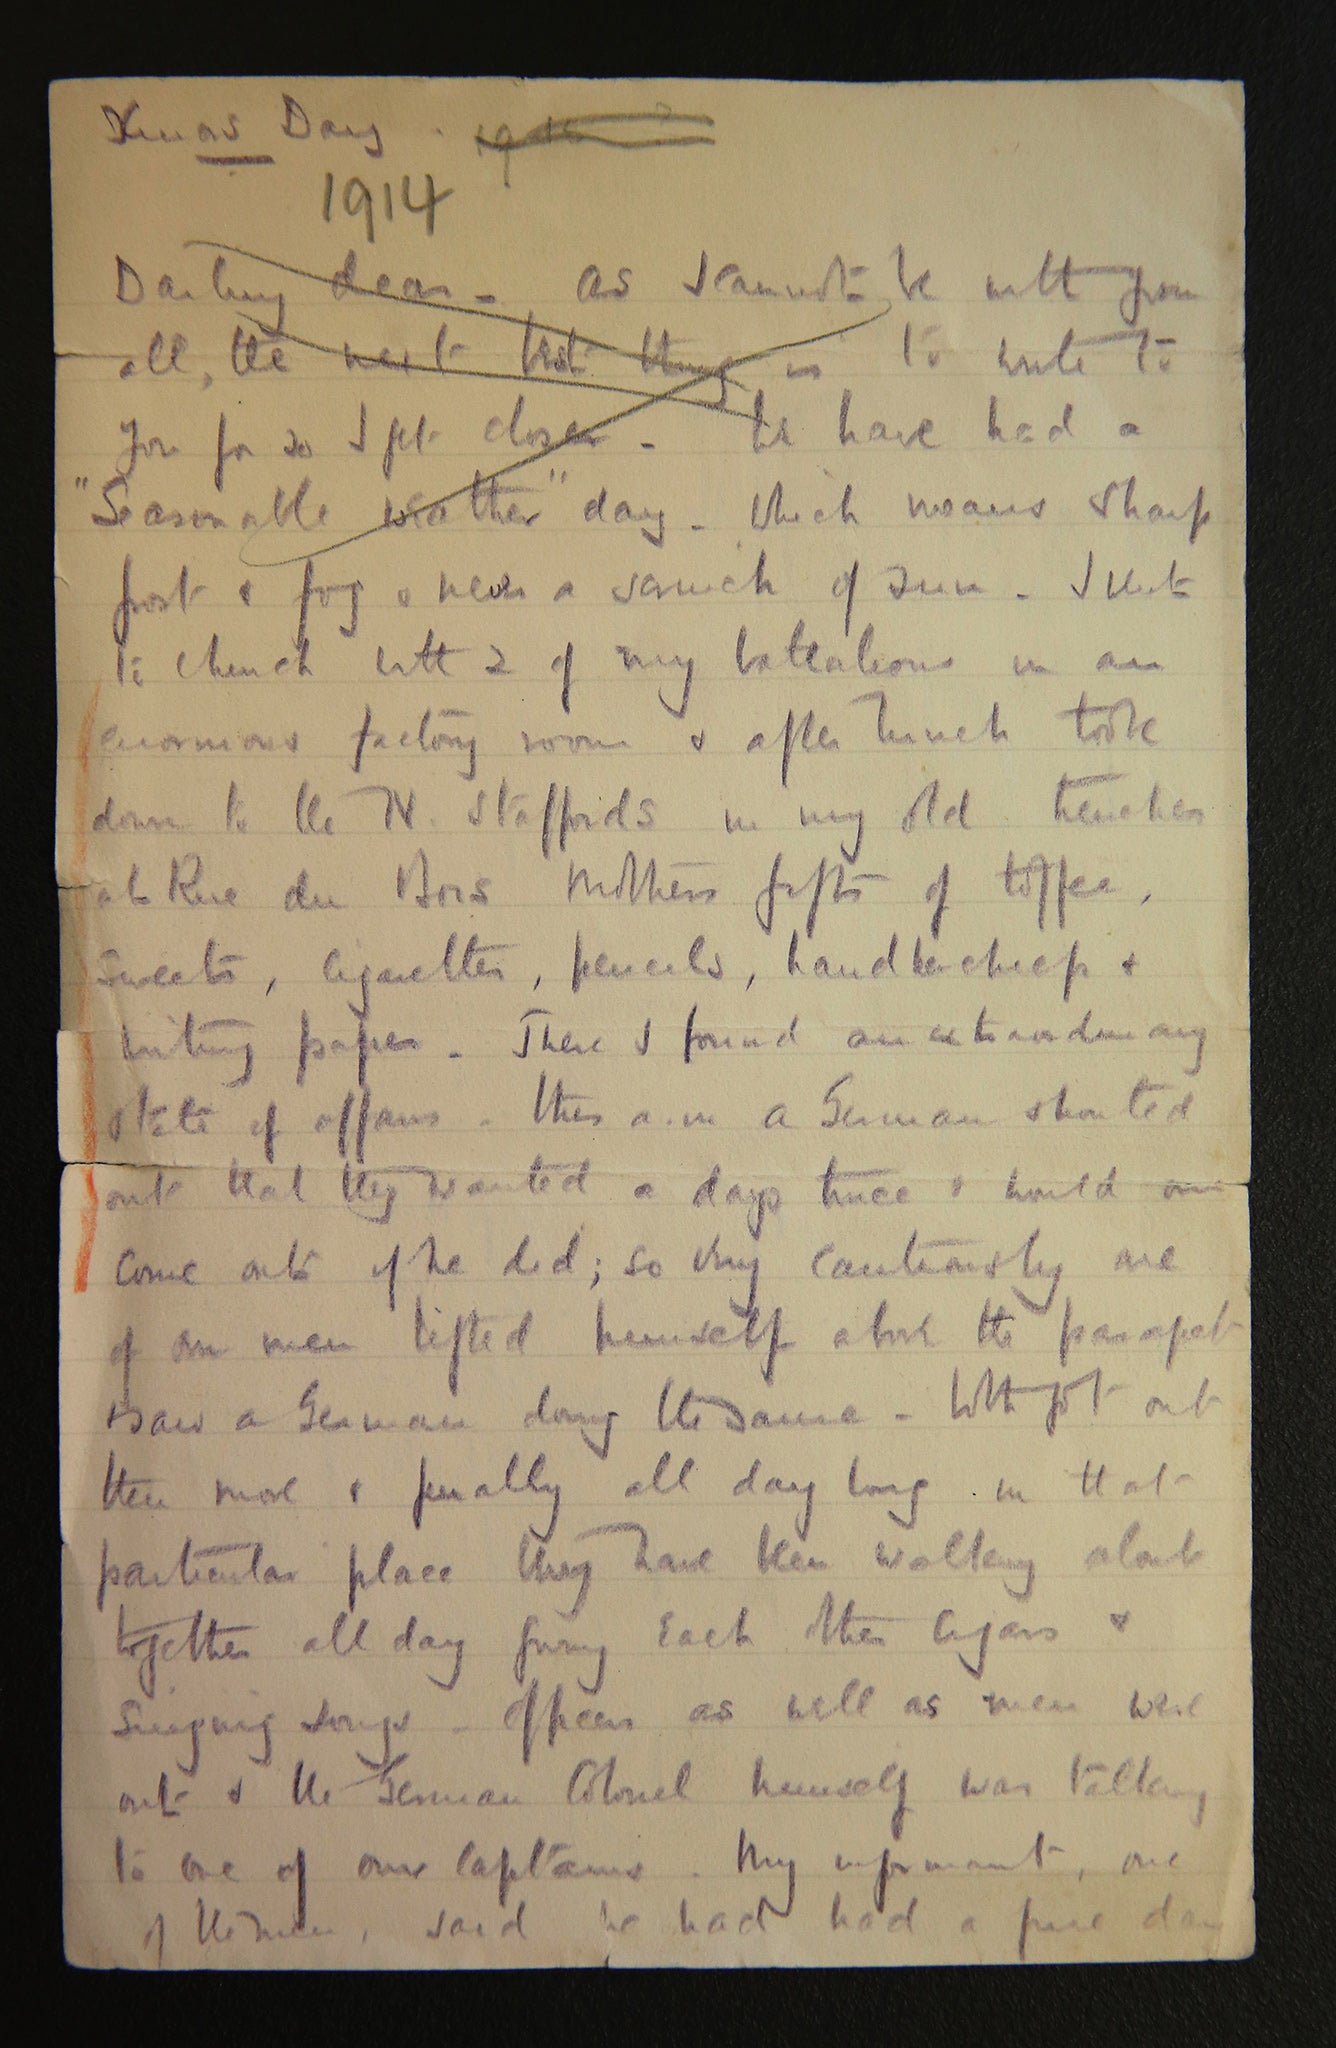 The letter written by General Walter Congreve VC describing the Christmas Day Truce of 1914